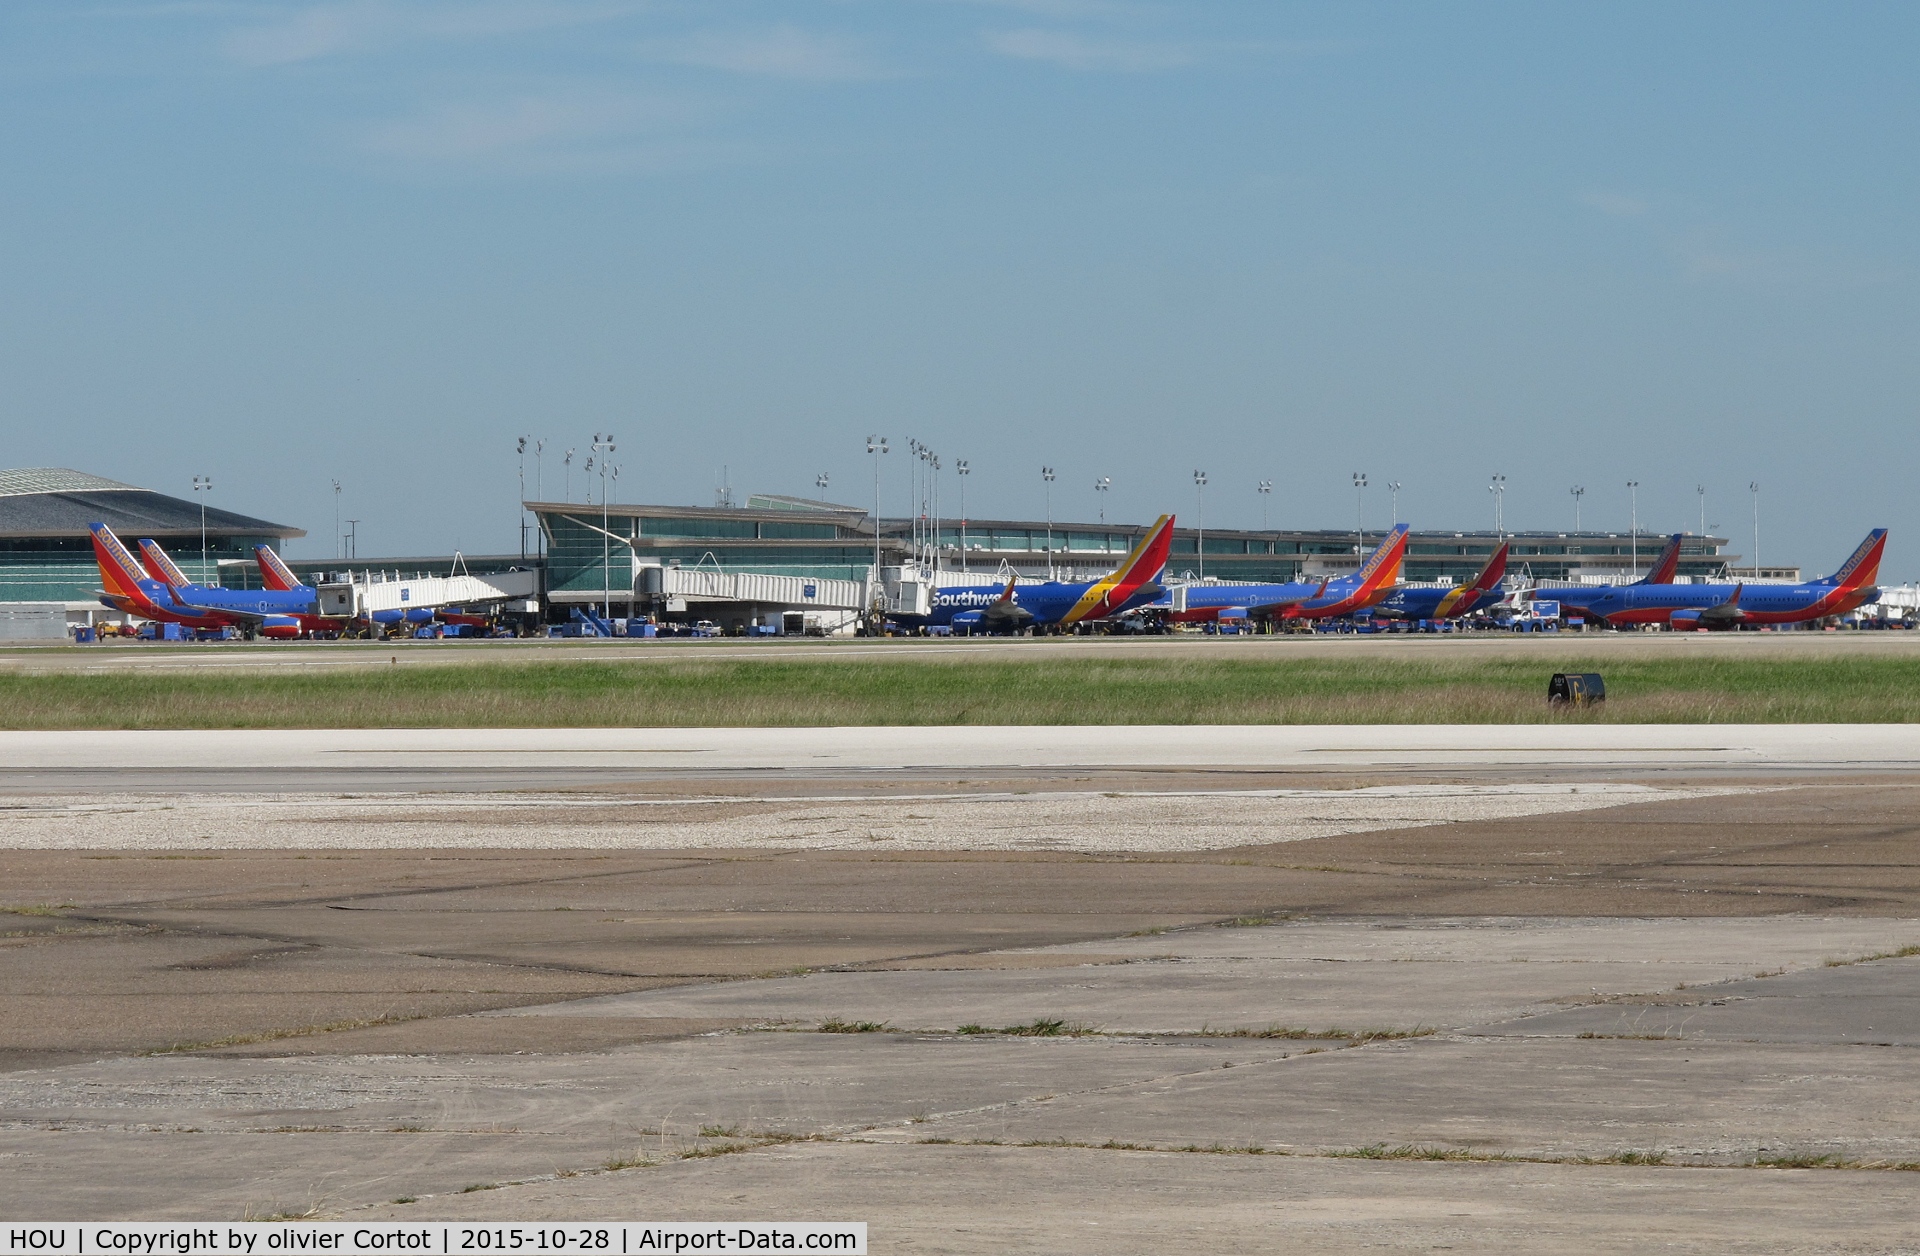 William P Hobby Airport (HOU) - A lot of southwest